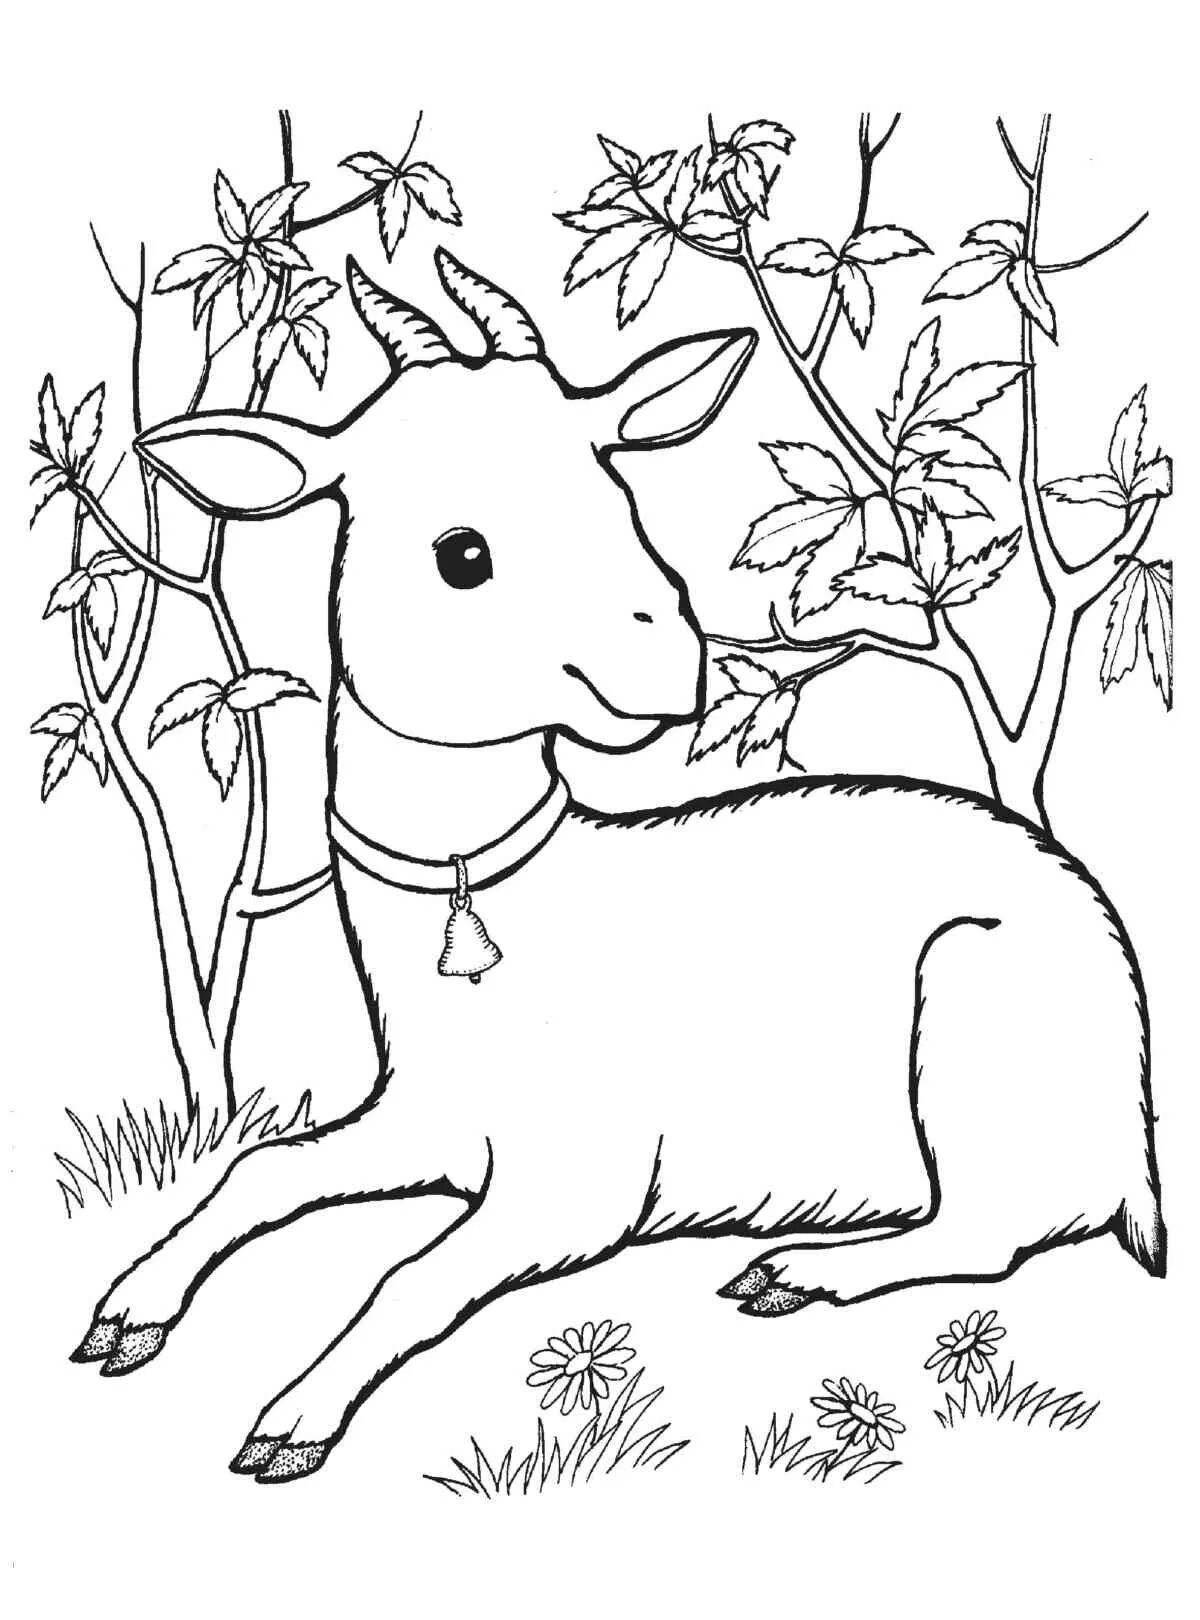 Coloring page energetic goat for kids